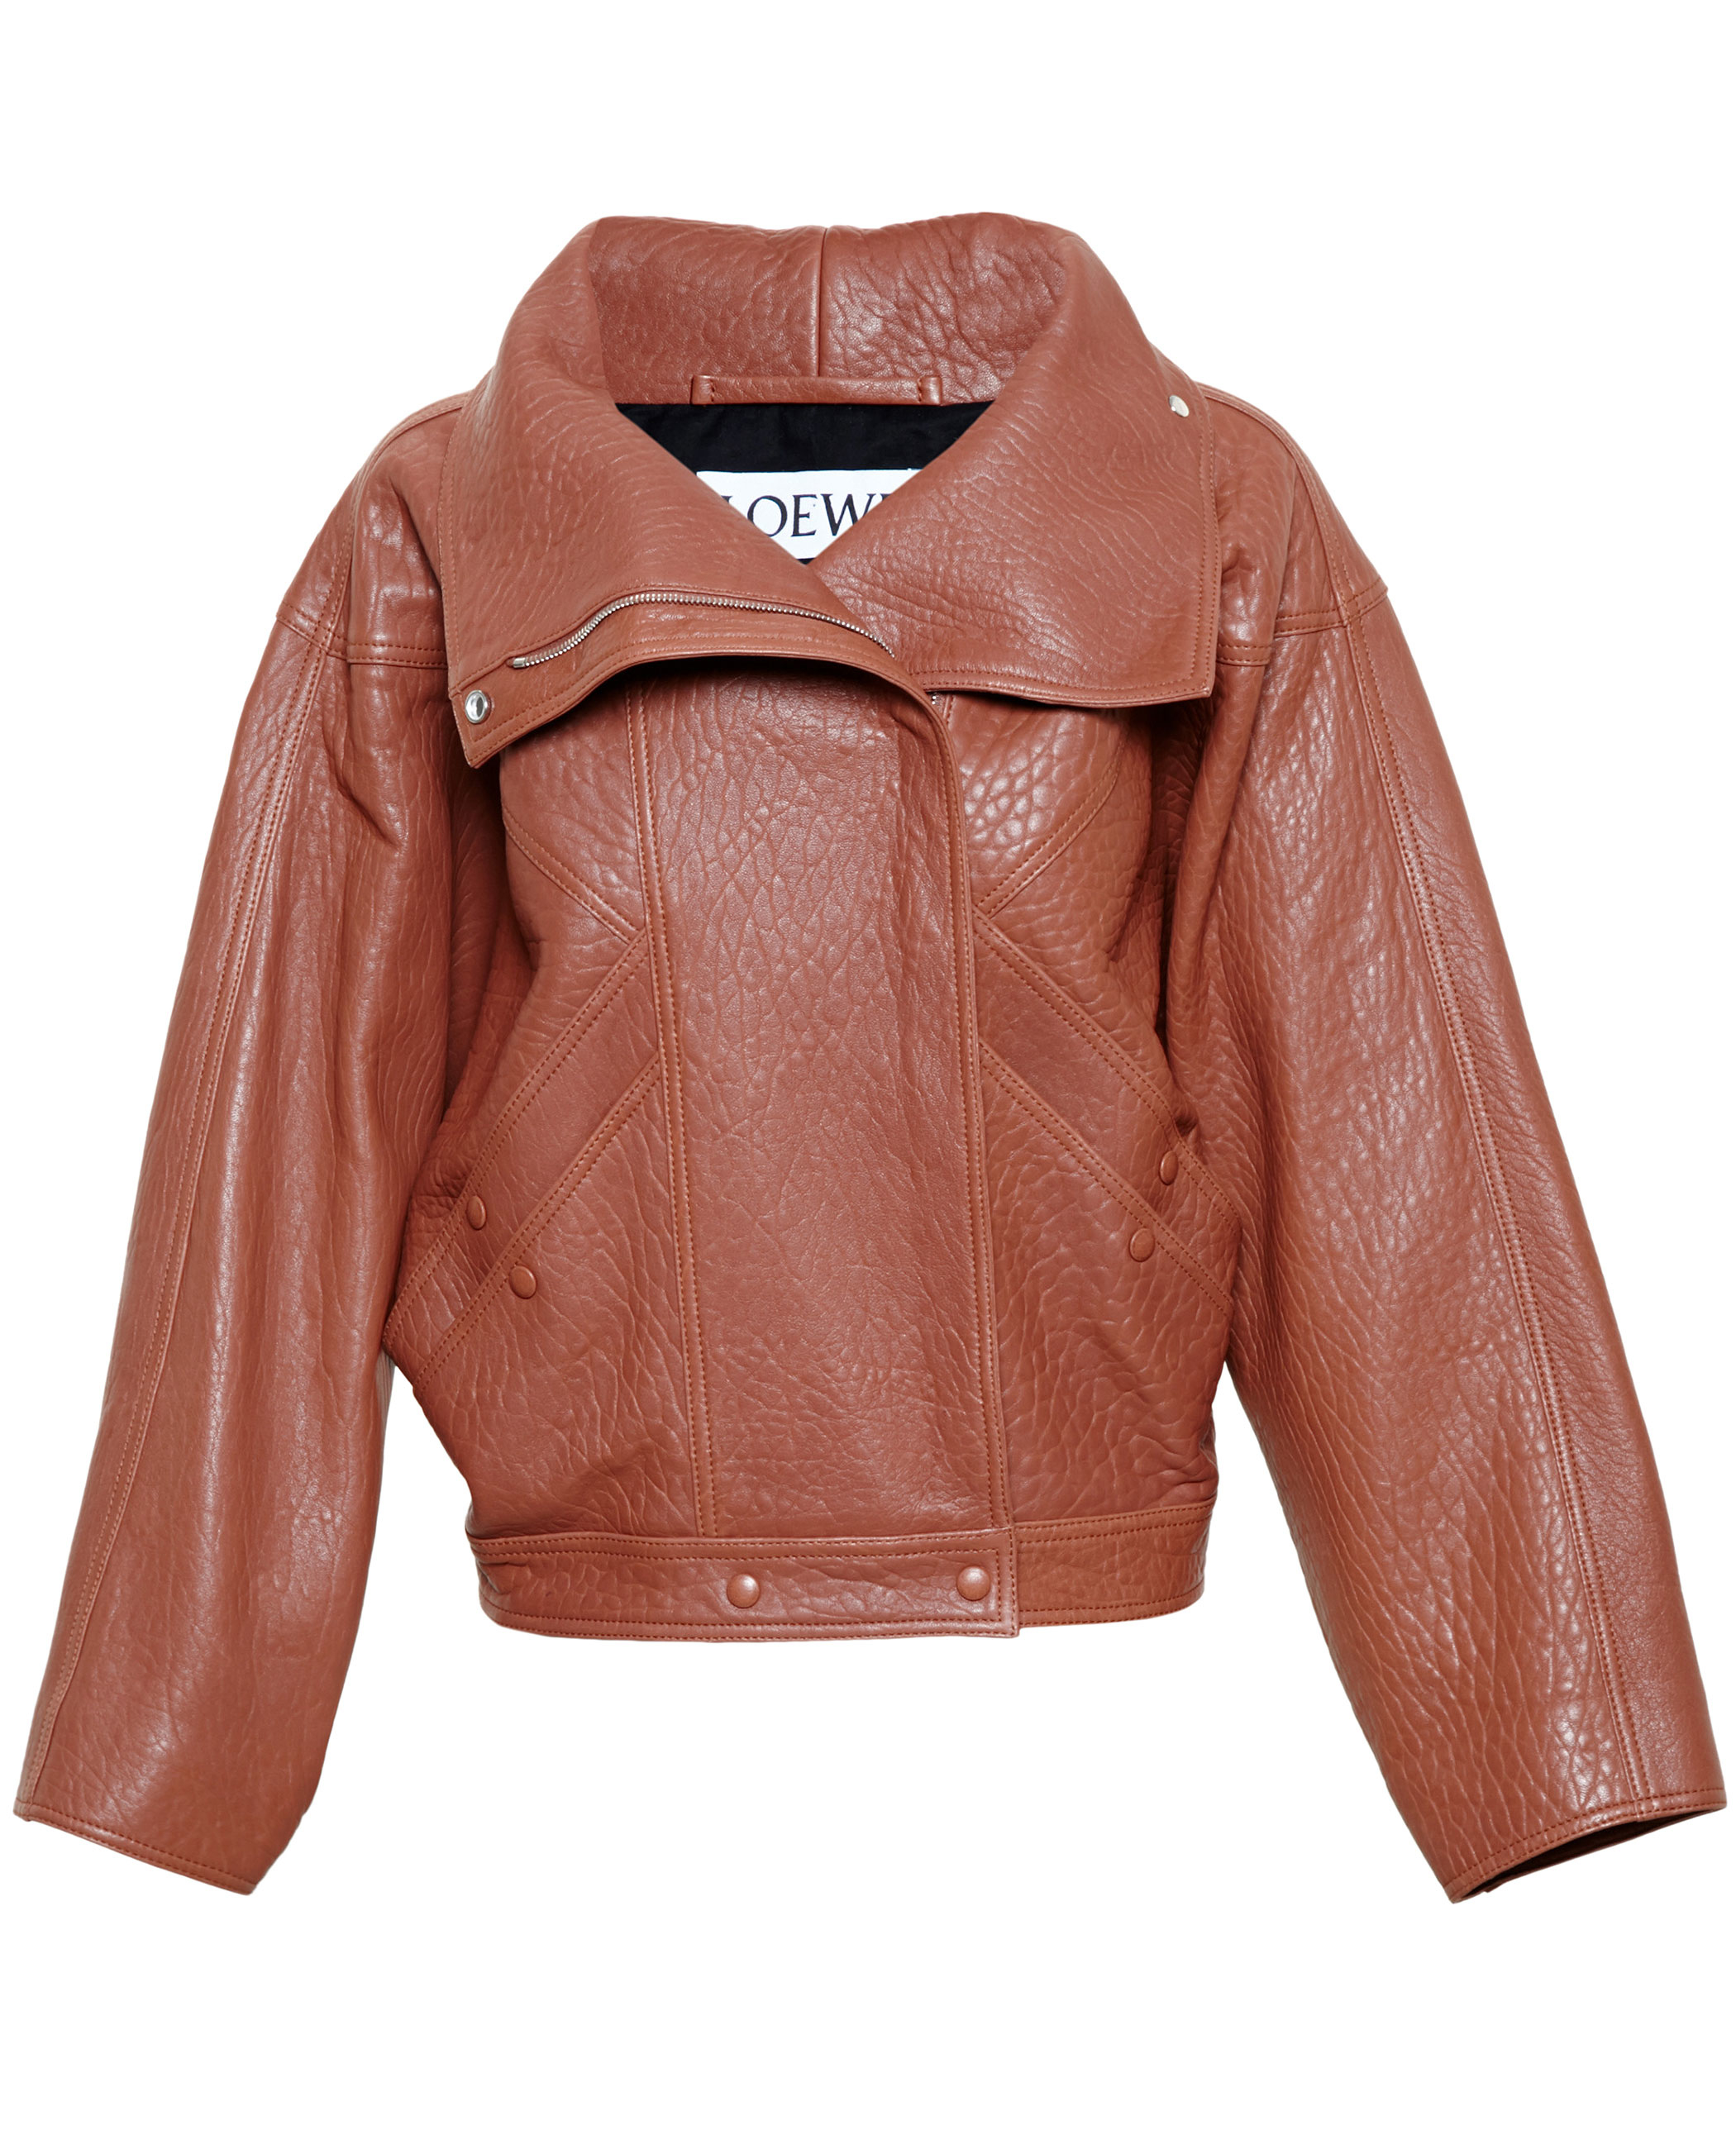 Lyst - Loewe Over-sized Leather Bomber Jacket in Brown